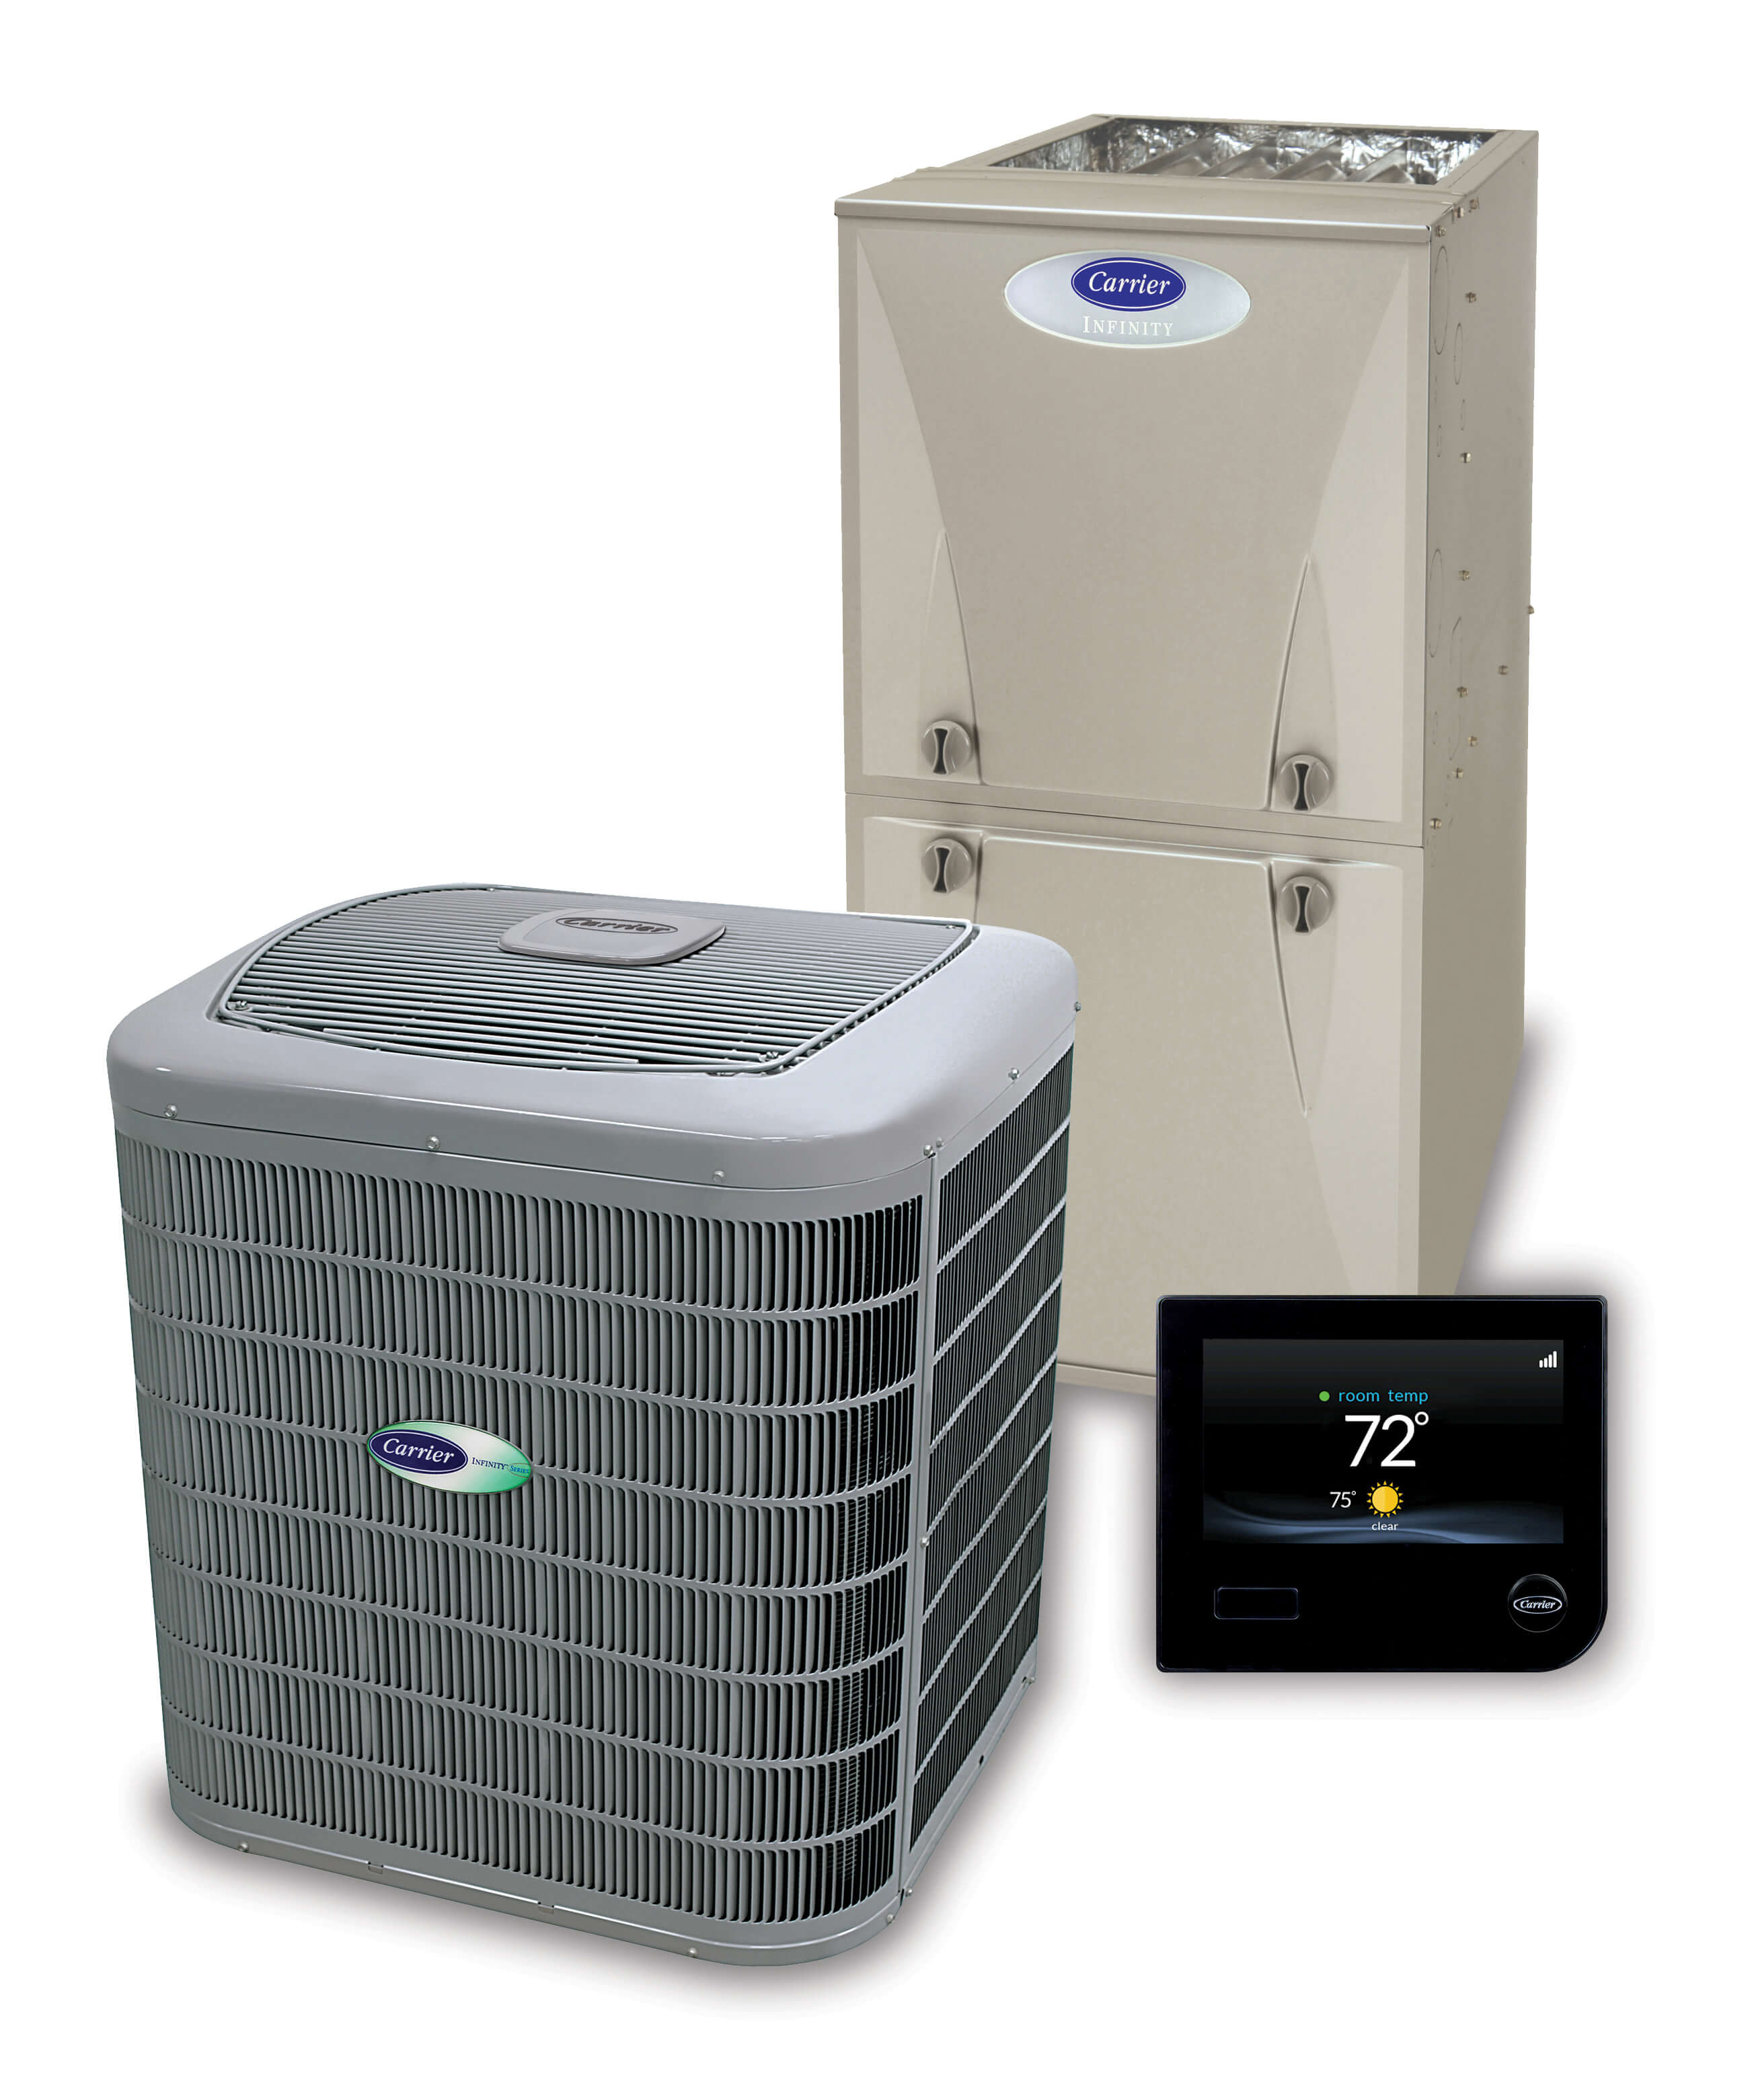 Carrier heating and cooling products offered from Degree Heating & Cooling. 